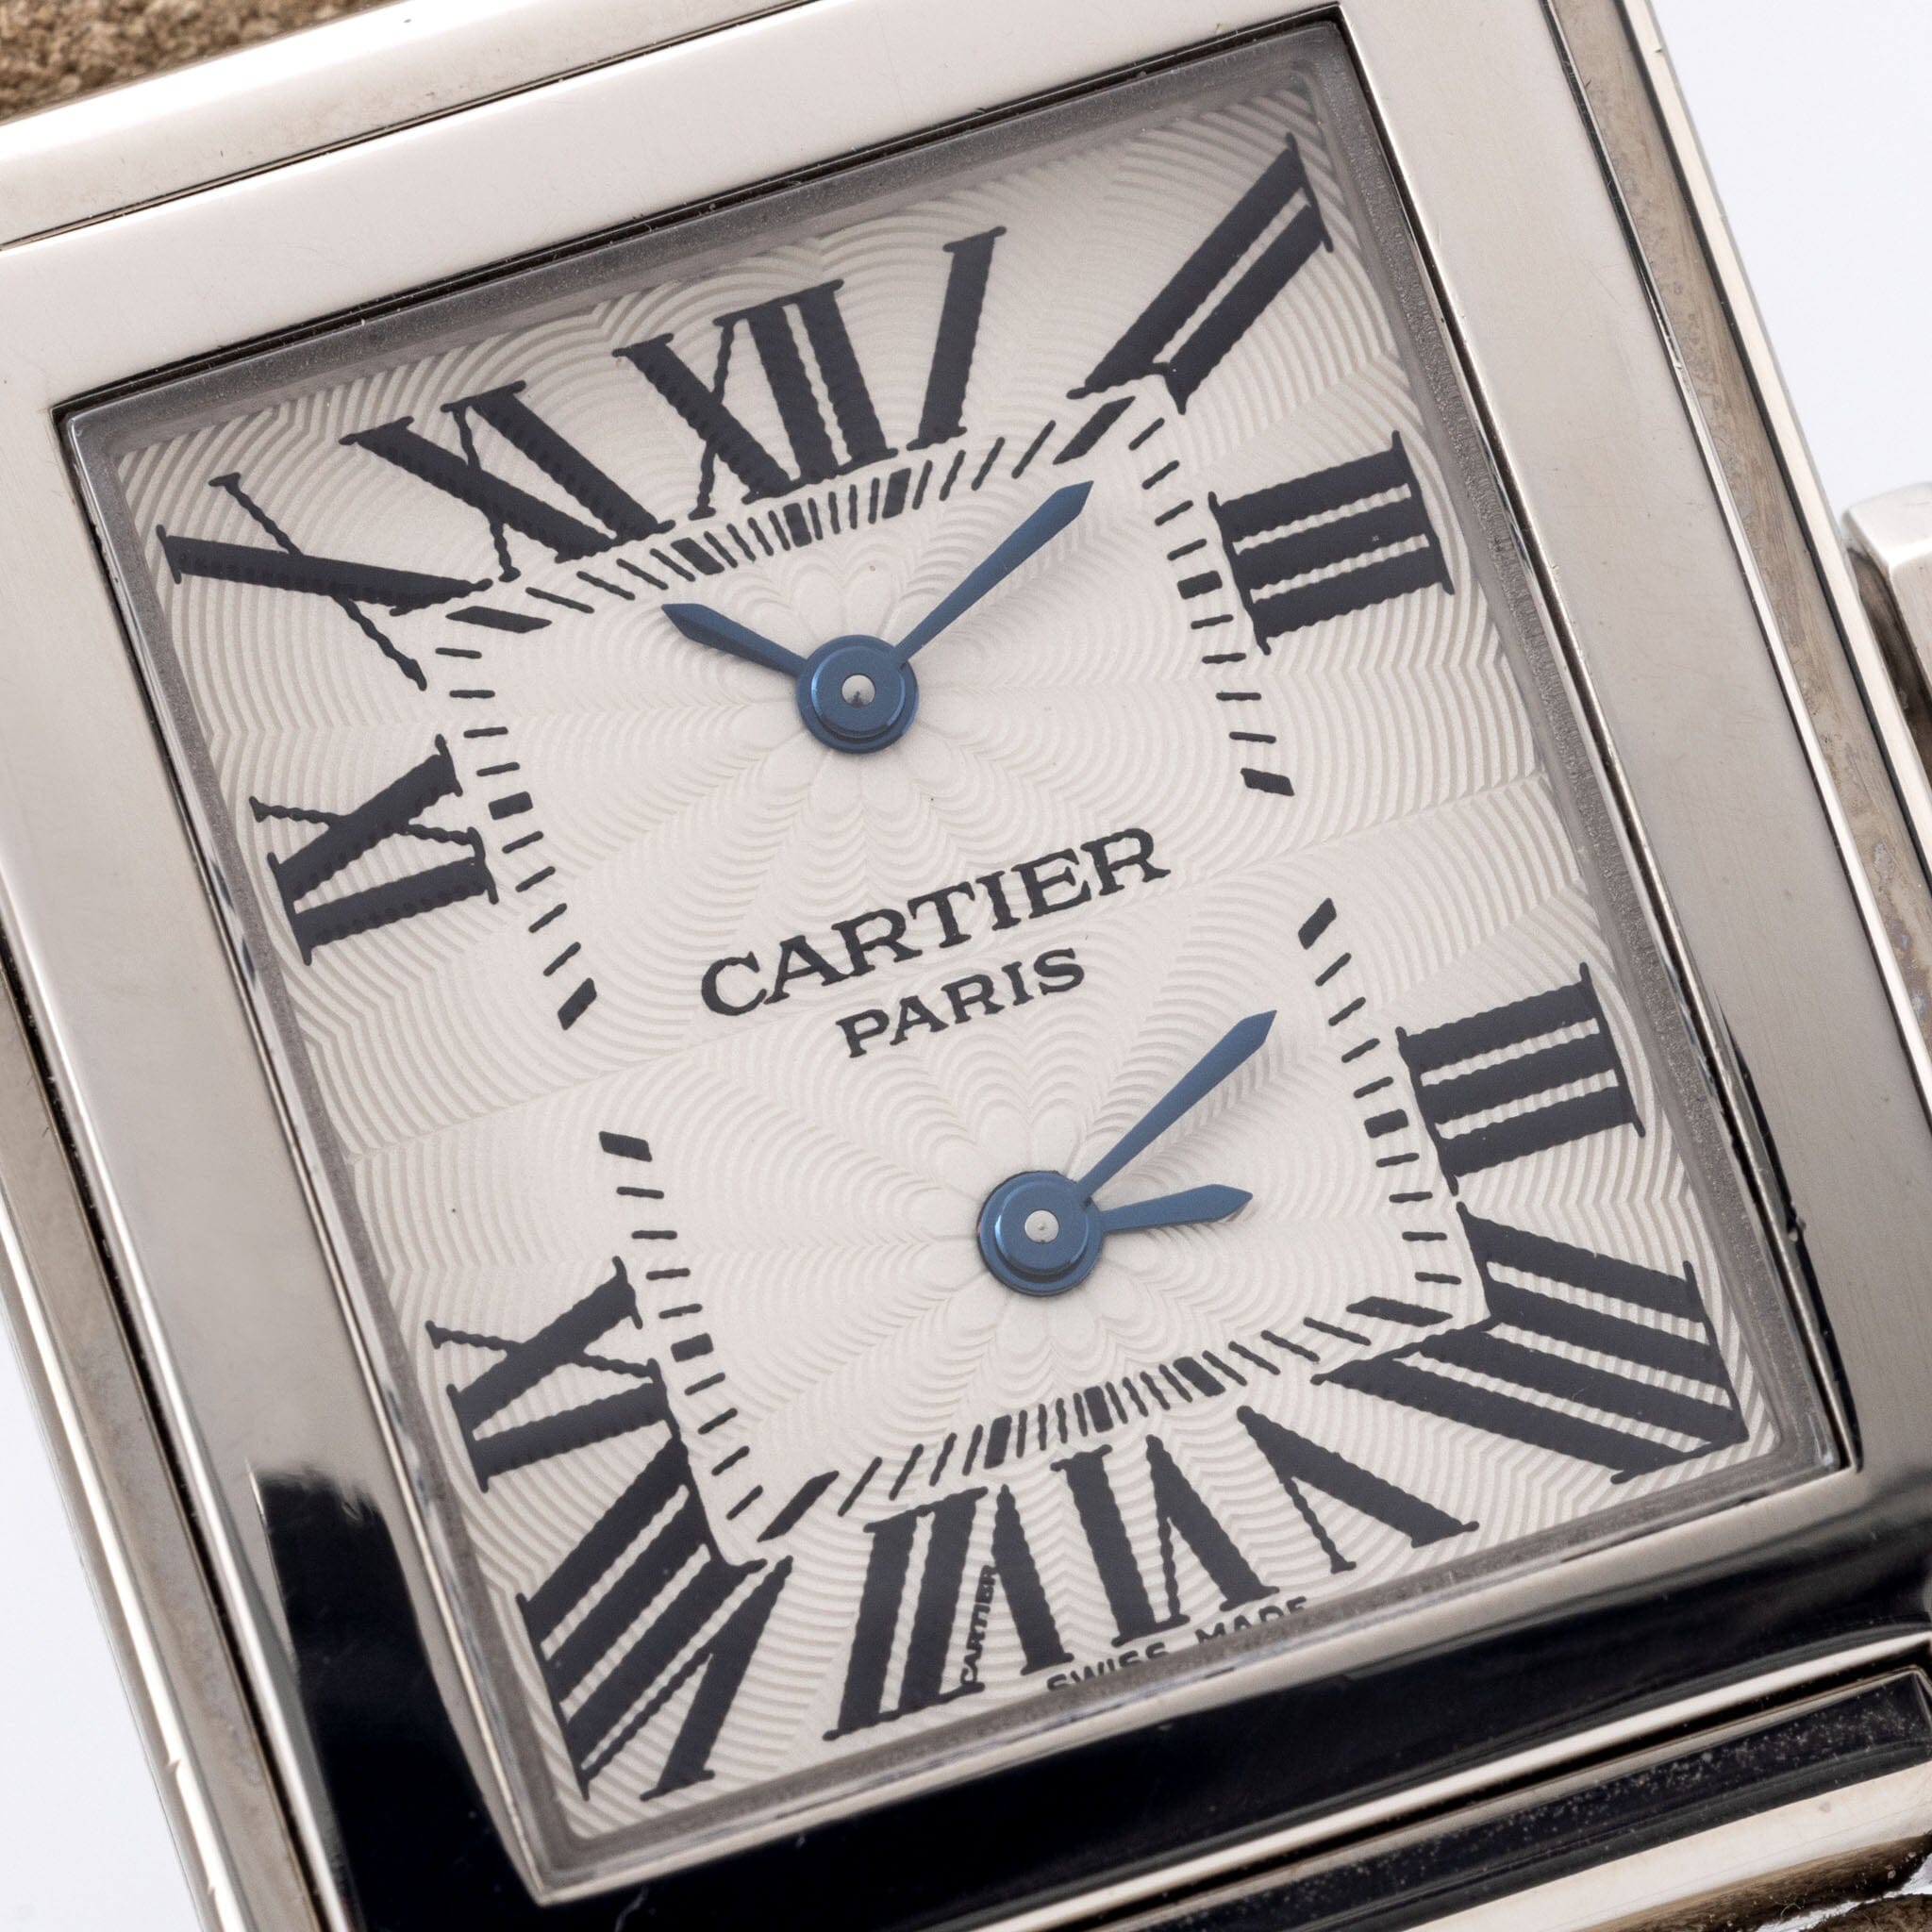 Cartier Tank Louis Cartier 96019 Extra Plate 1970s for $9,612 for